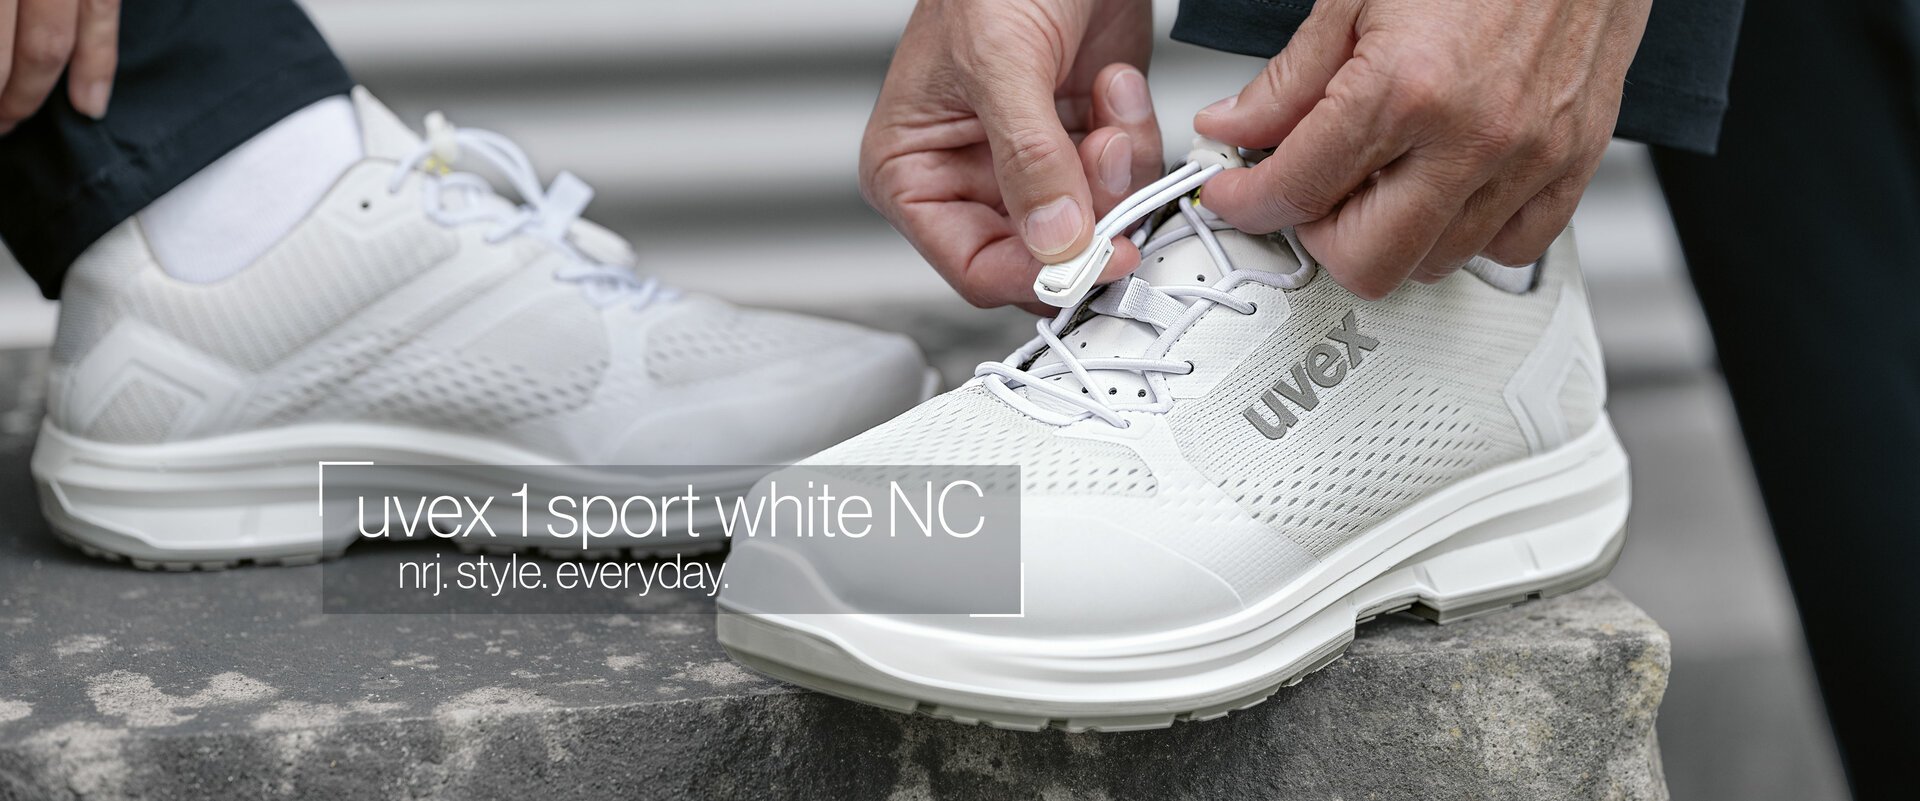 White professional shoe with a sporty look also for leisure time